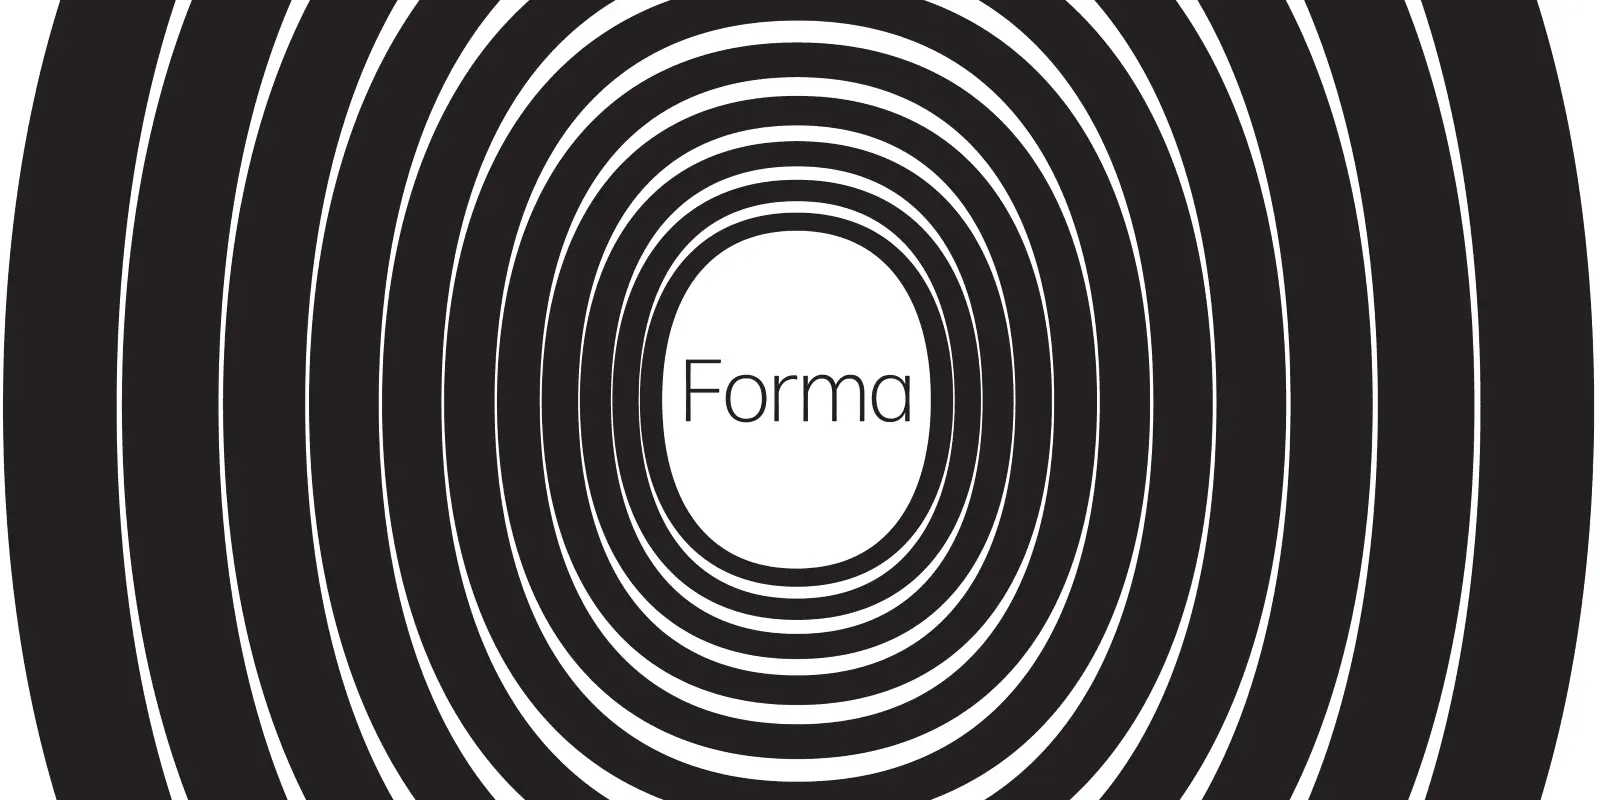 Example of a Forma DJR typeface.